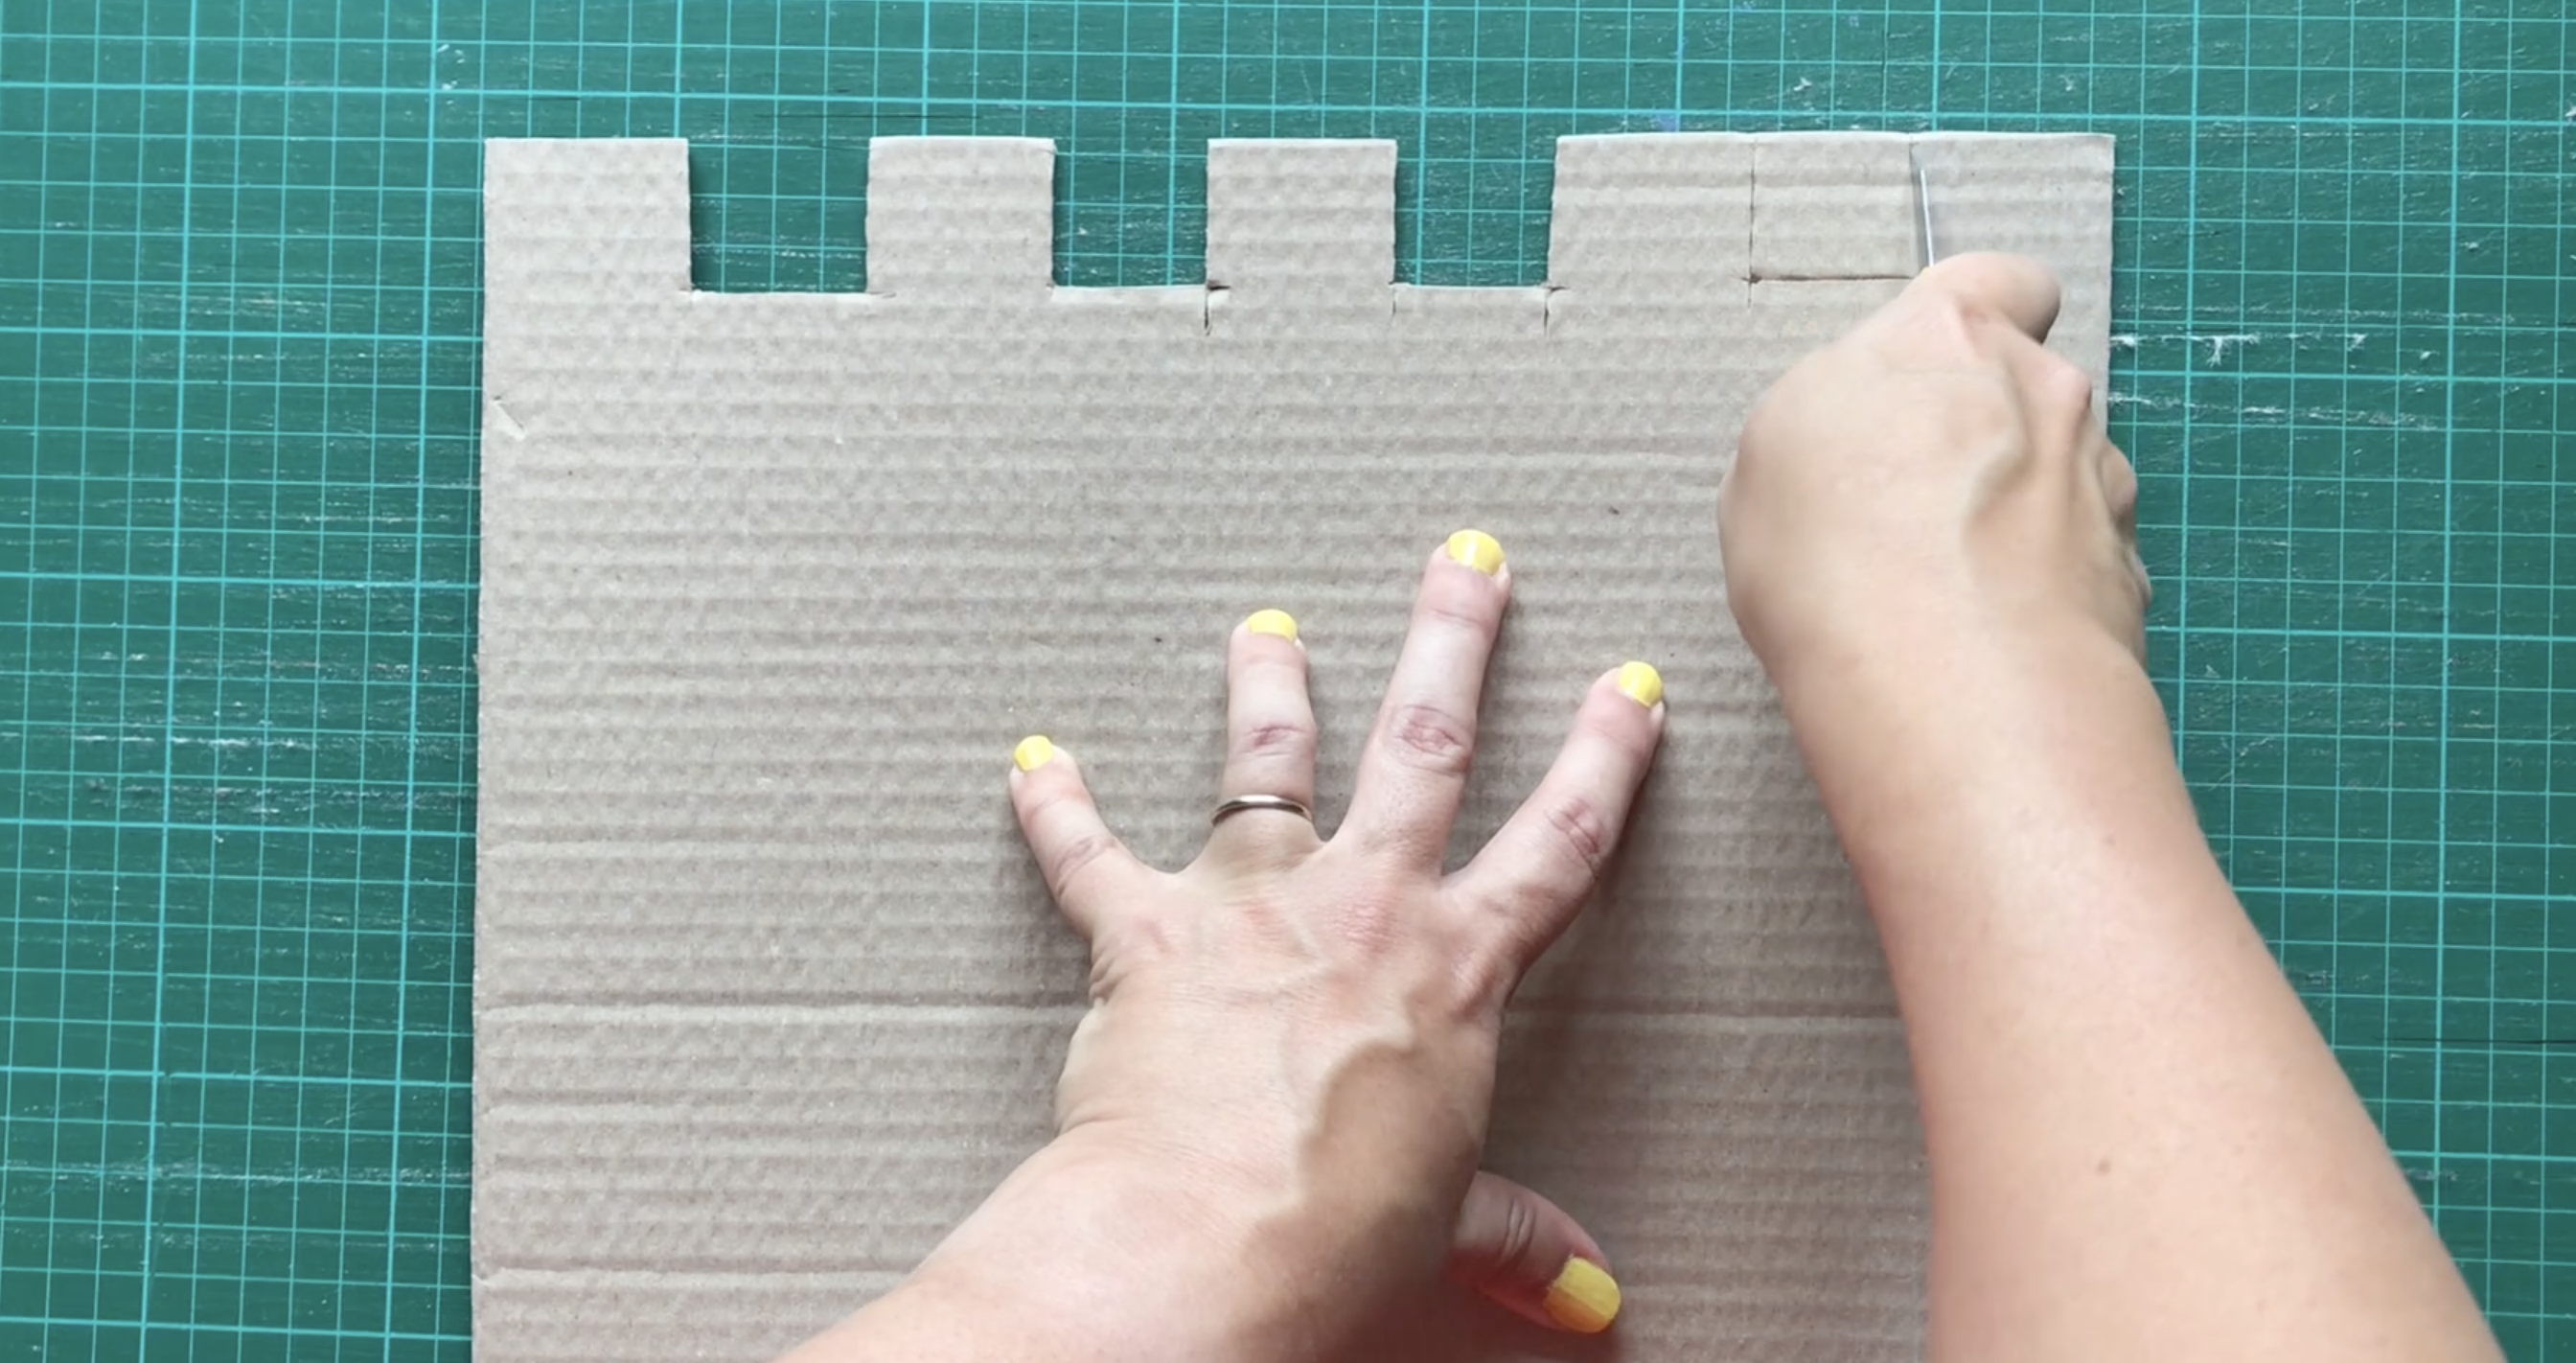 Hands cutting squares from the top of a sheet of cardboard to make castle battlements